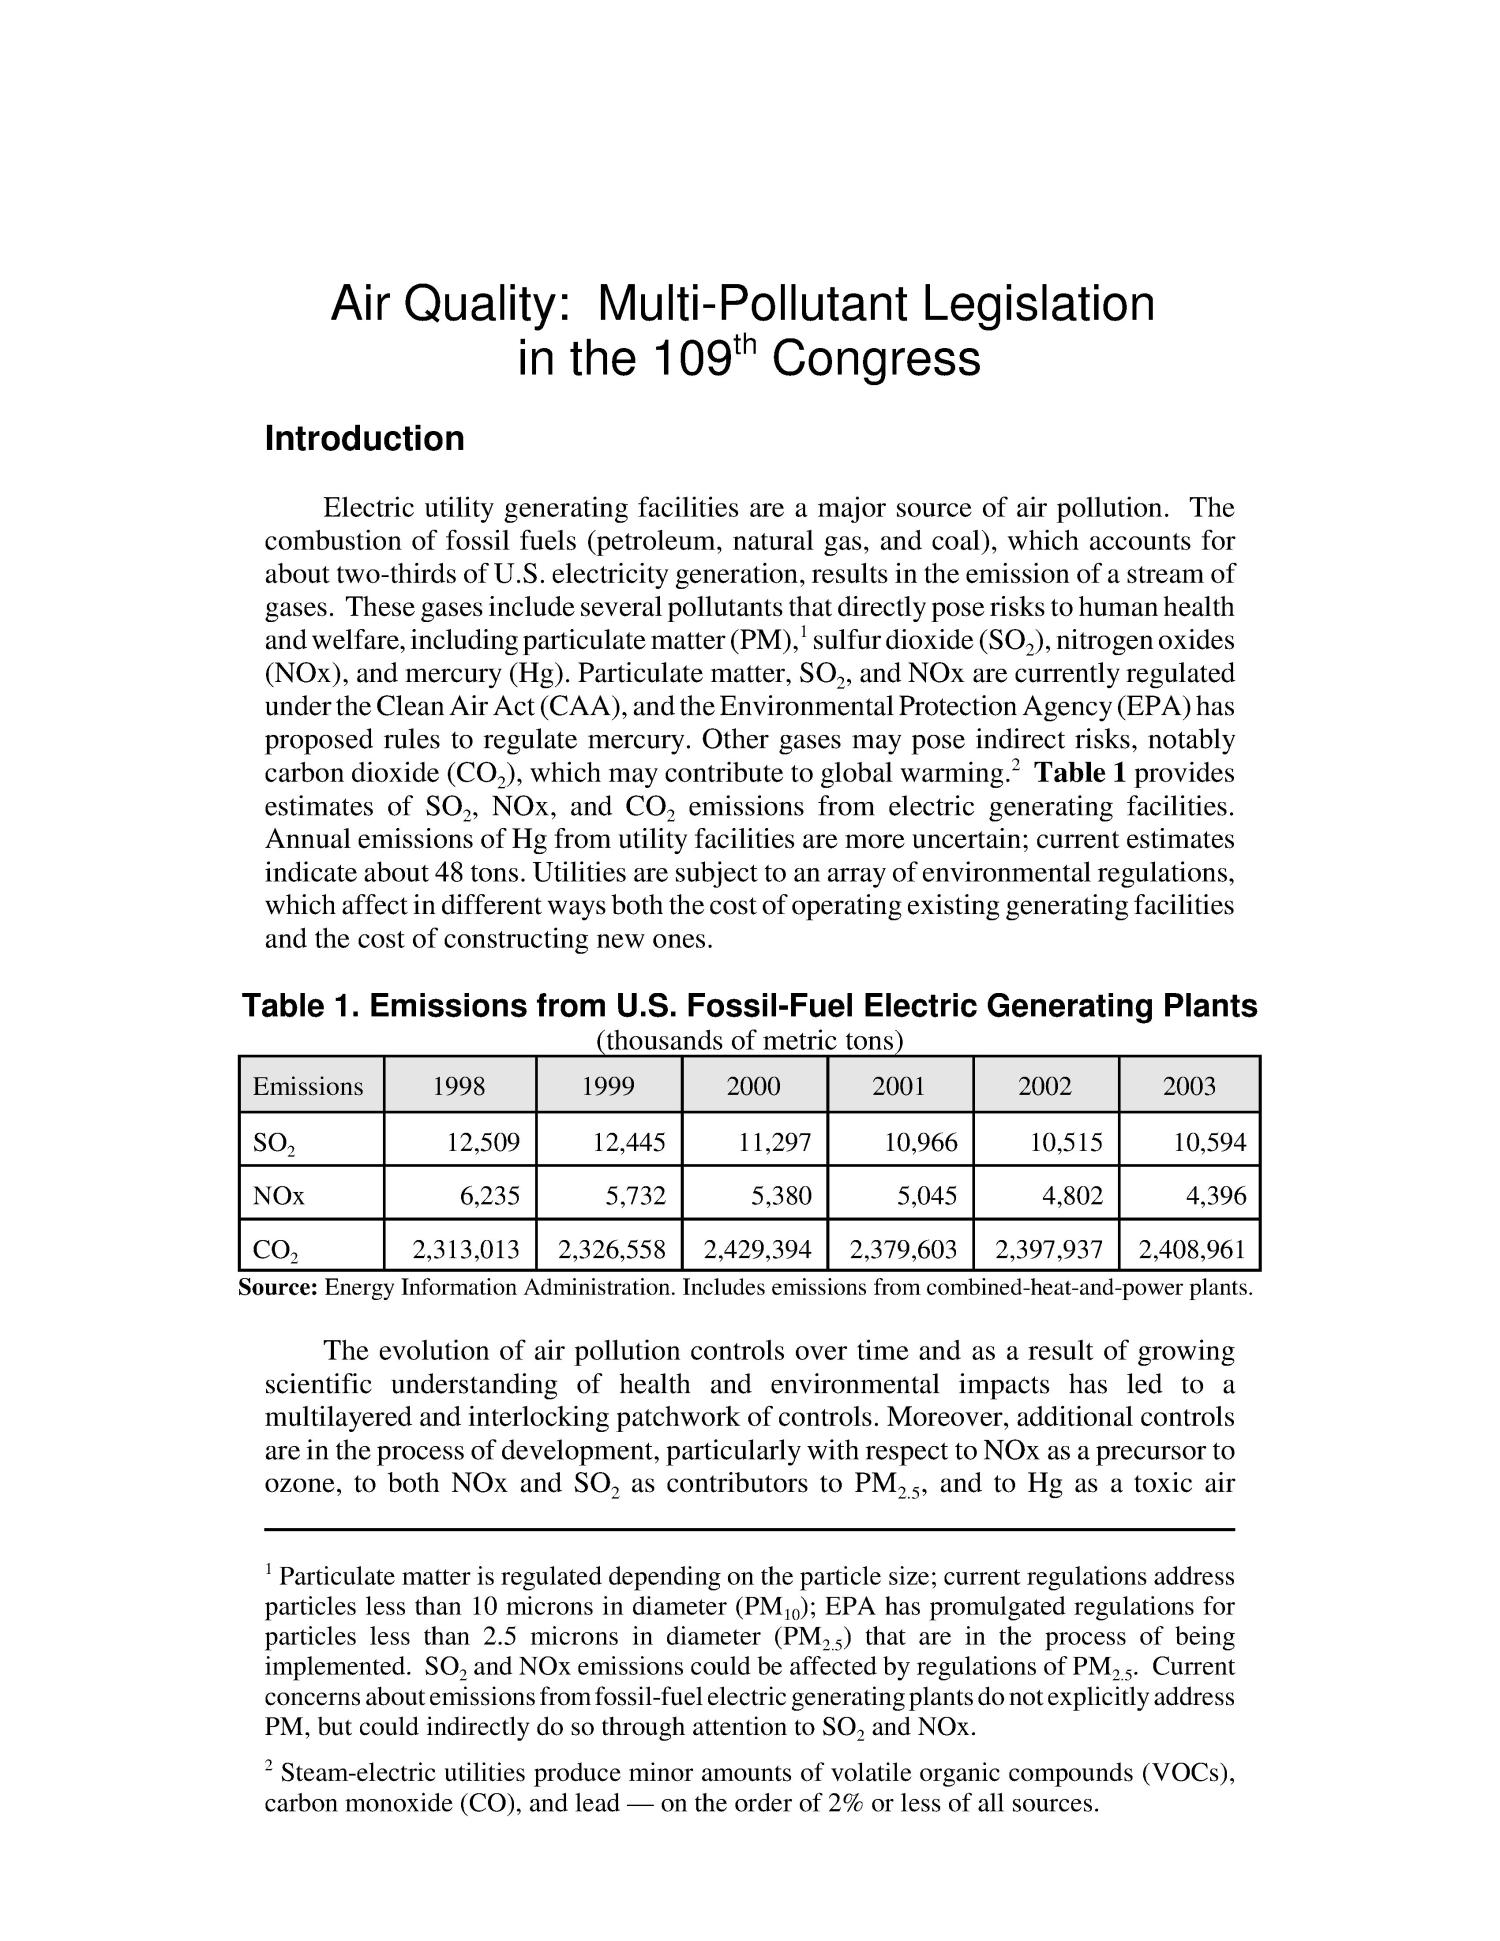 Air Quality: Multi-Pollutant Legislation in the 109th Congress
                                                
                                                    [Sequence #]: 4 of 13
                                                